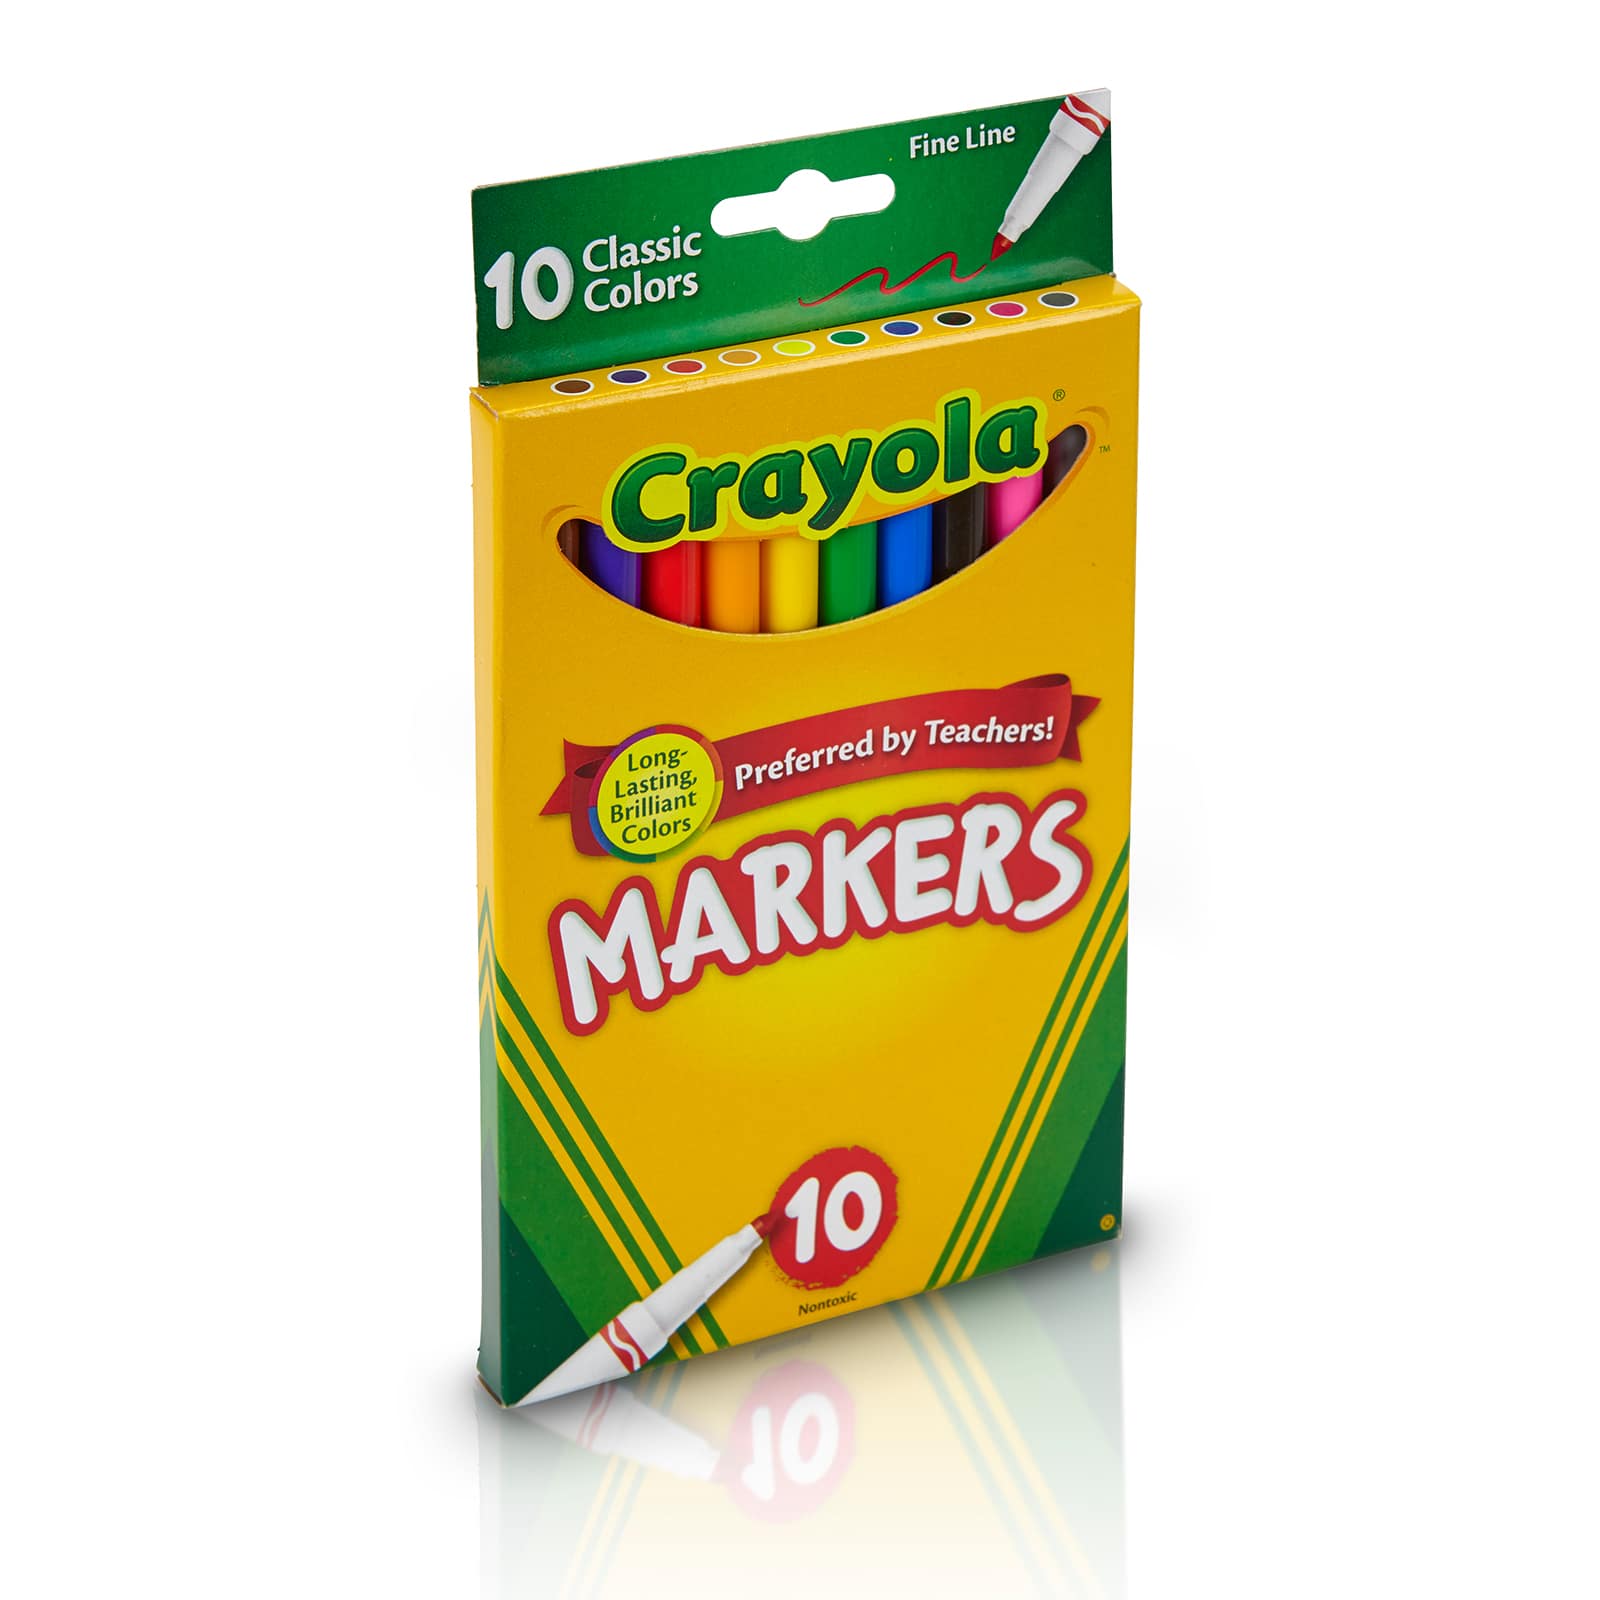 Crayola Fine Line Markers, Classic Colors, 10 Count